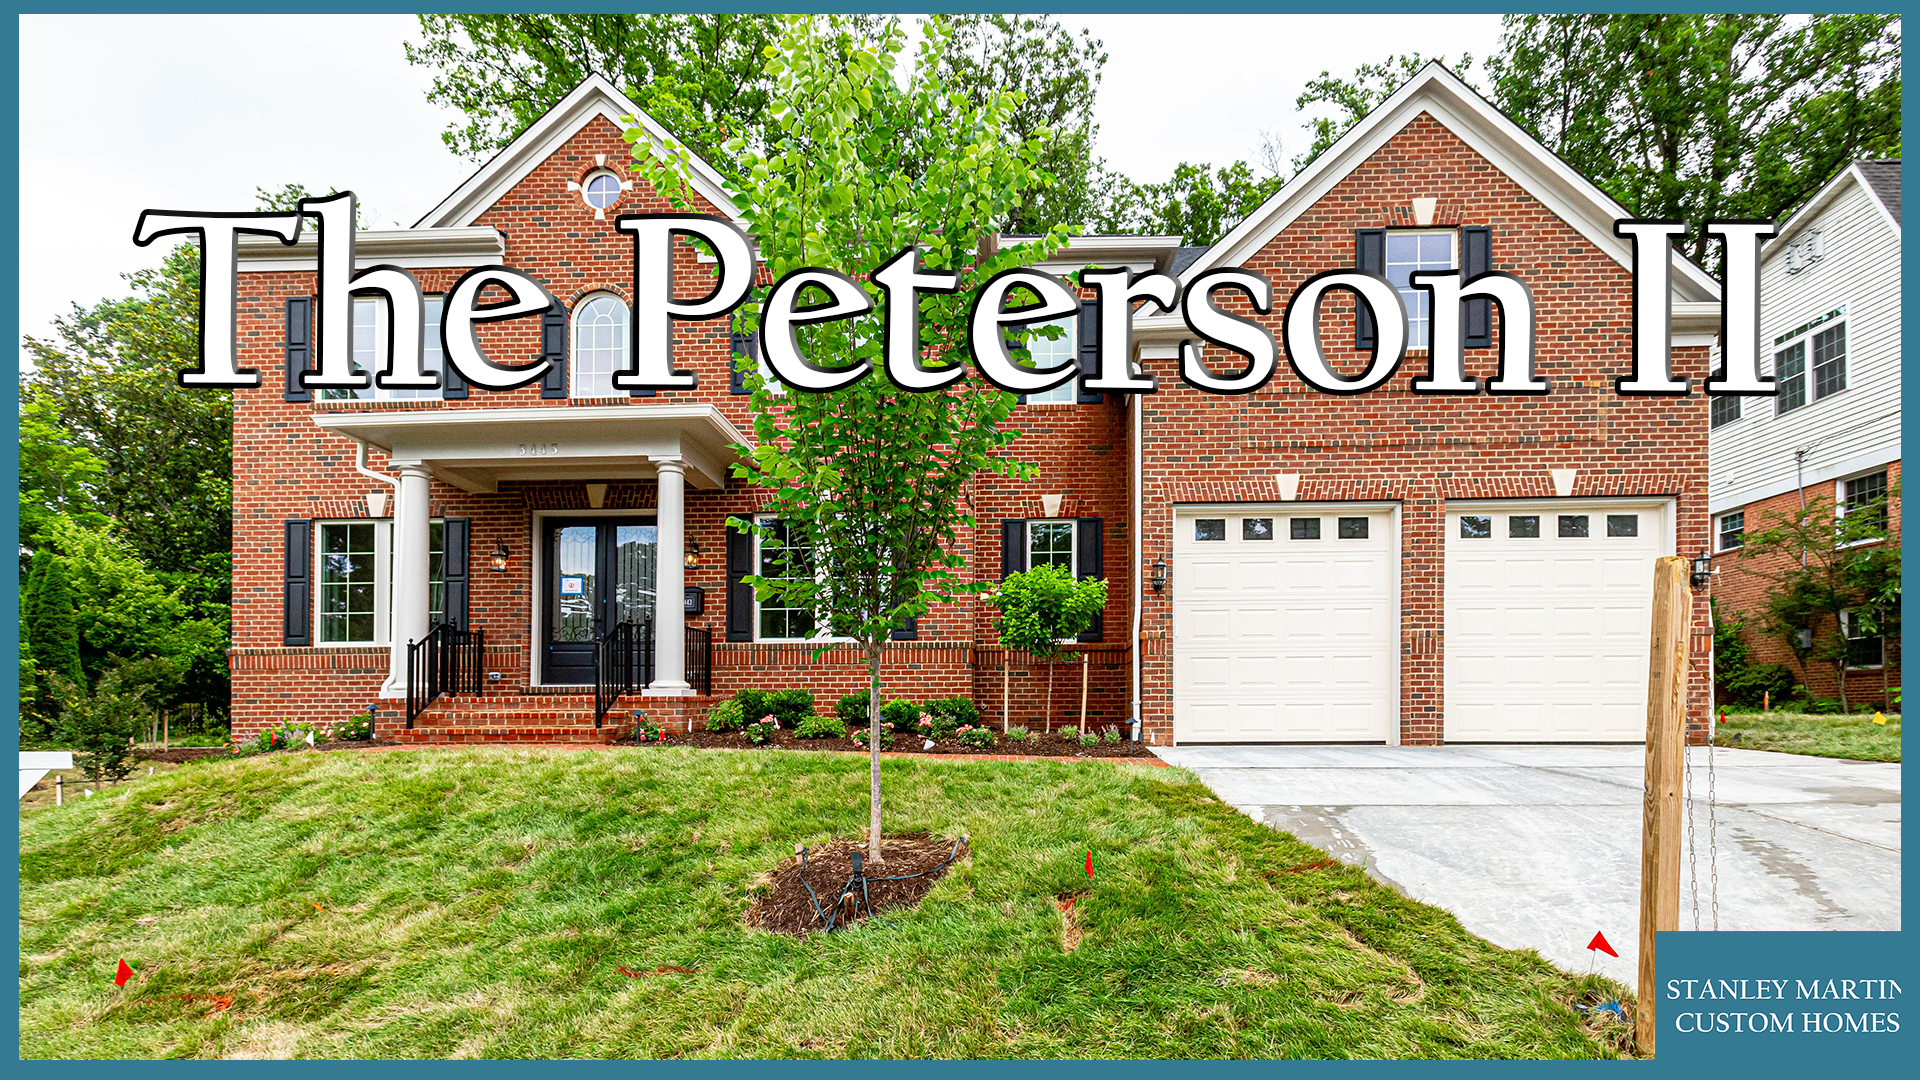 Stanley Martin Custom Homes | The Peterson